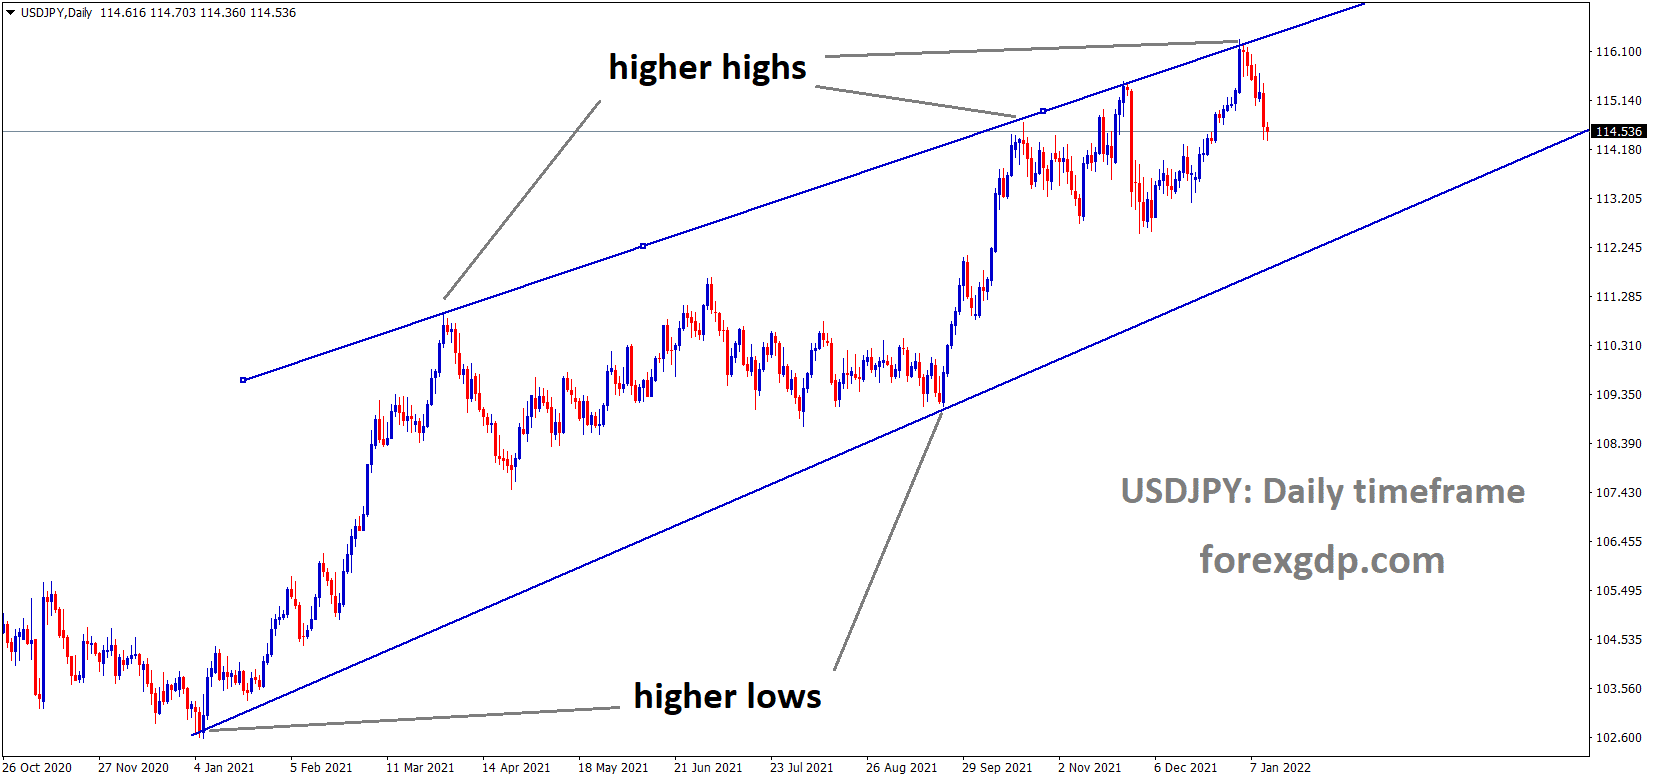 USDJPY is moving in an ascending channel and the market has fallen from the higher high area of the channel